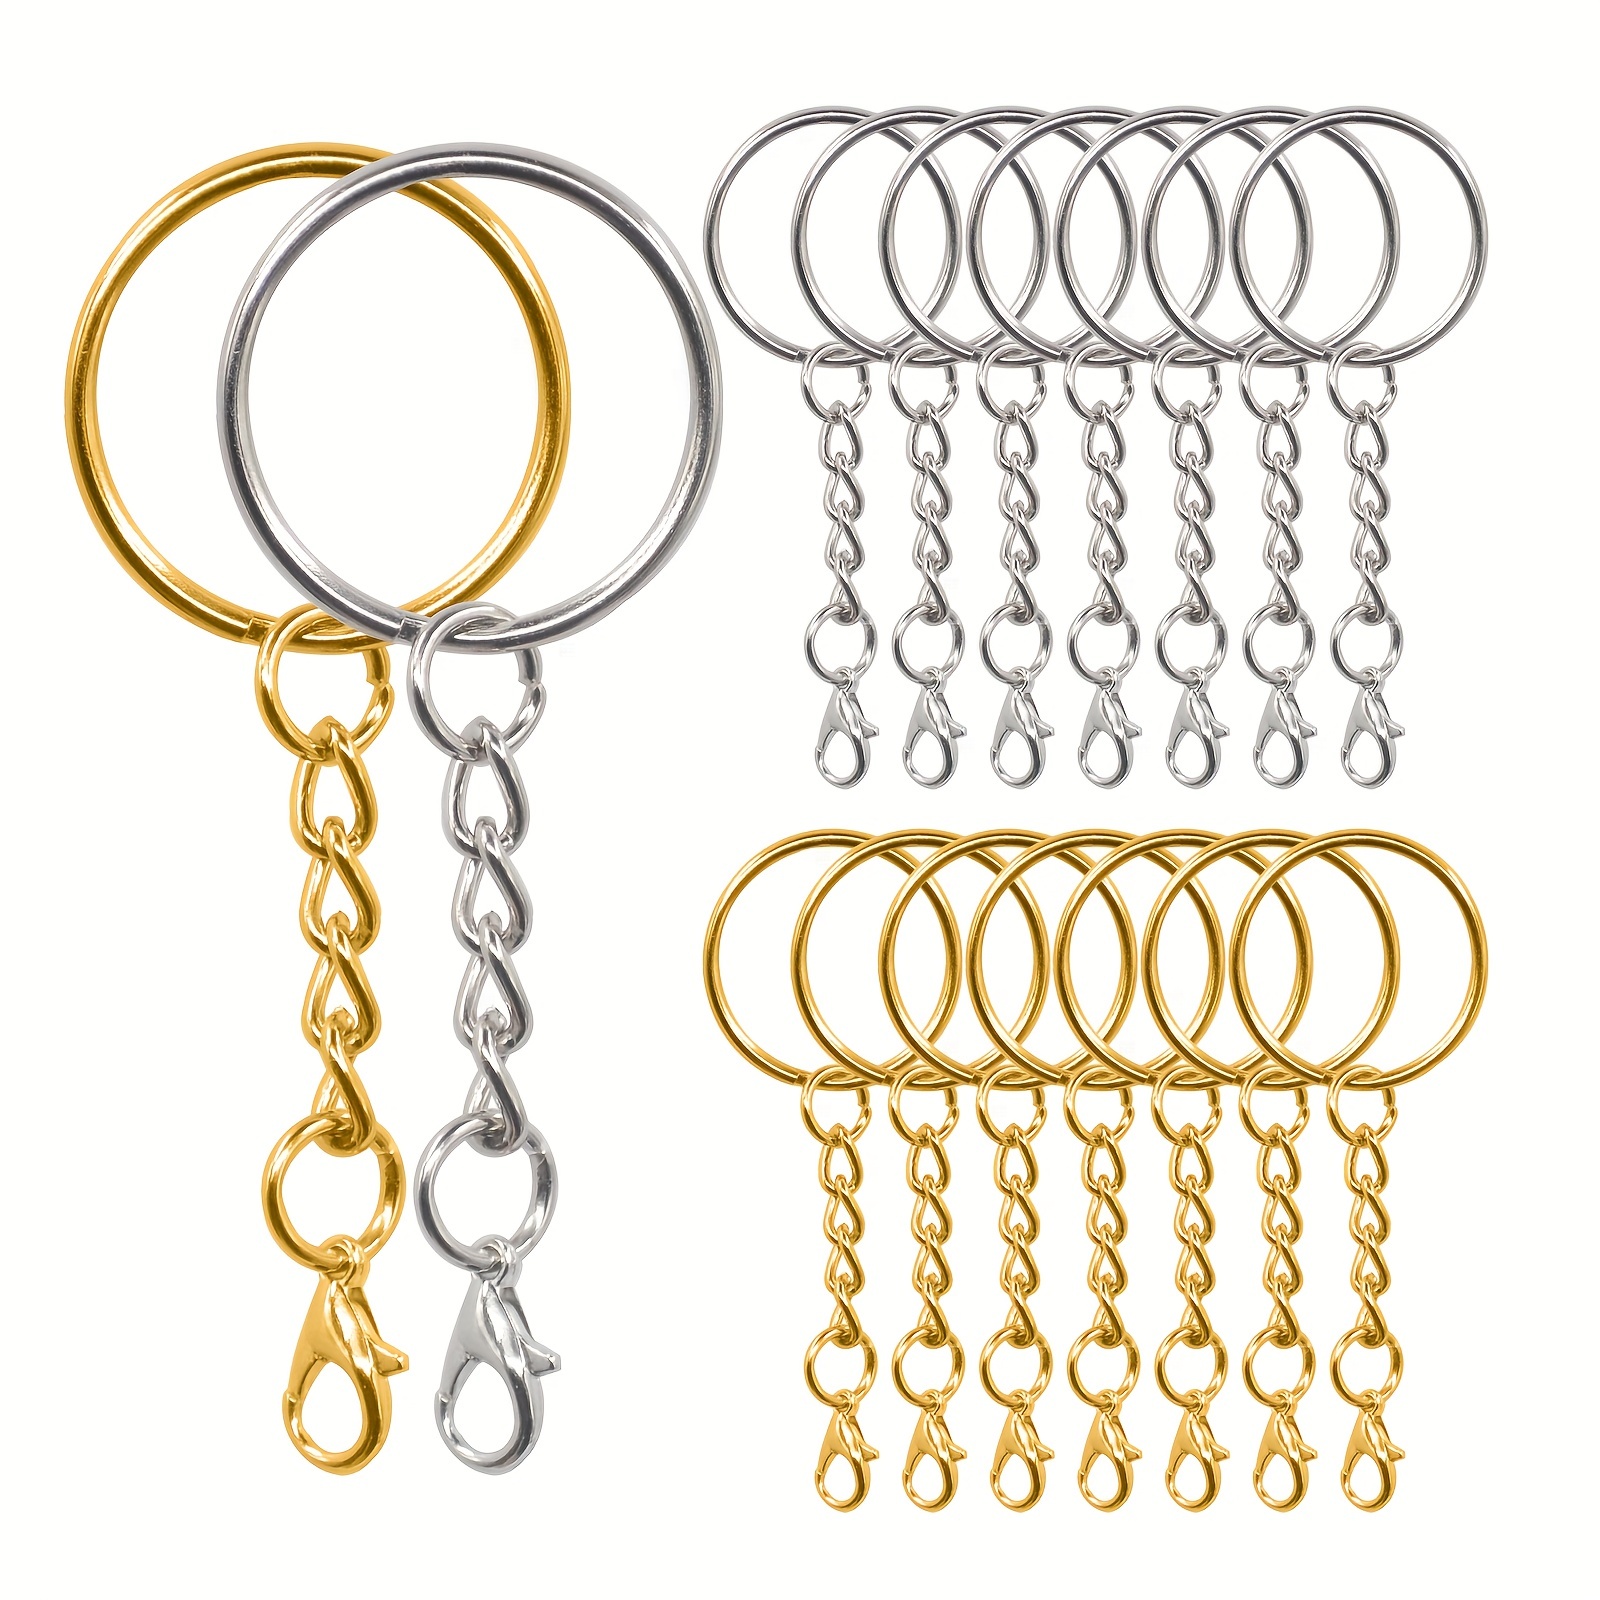 

20pcs/set Key Ring With Chain And Lobster Clasp Split Round Keychain Rings Bulk For Jewelry Making Craft